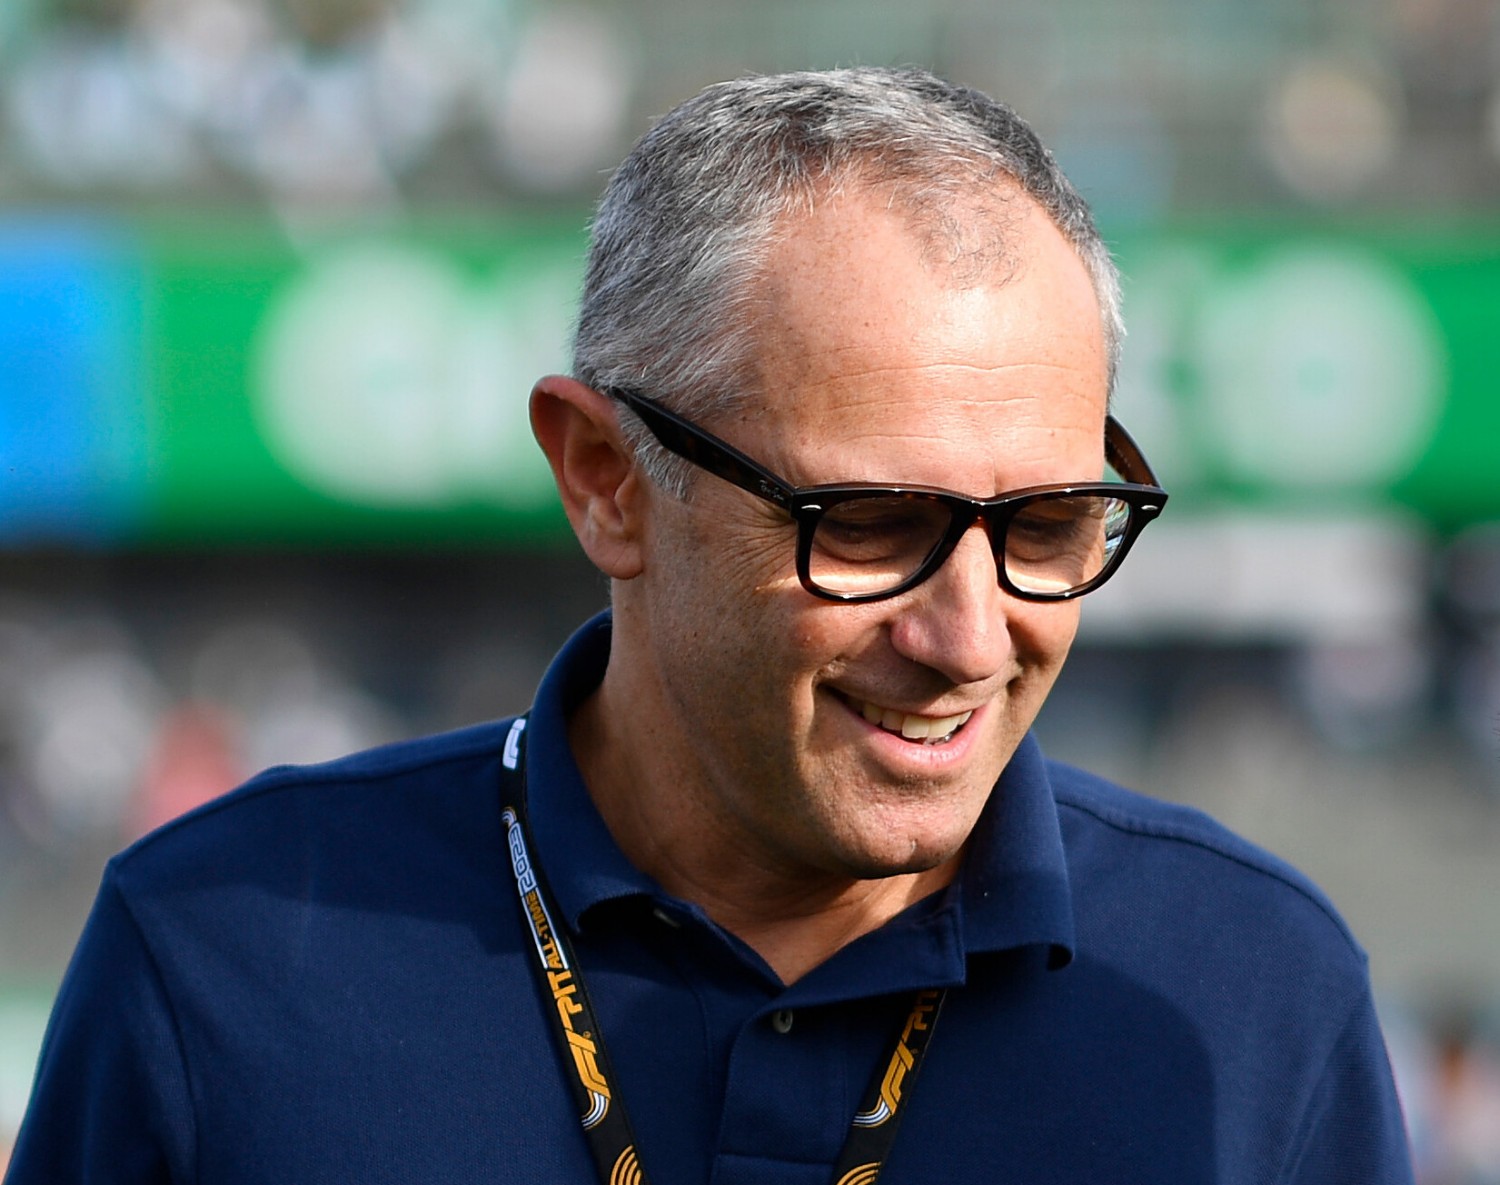 Stefano Domenicali, CEO of the Formula One Group, during previews ahead of the F1 Grand Prix of Japan at Suzuka International Racing Course on September 21, 2023 in Suzuka, Japan. (Photo by Rudy Carezzevoli/Getty Images) // Getty Images / Red Bull Content Pool